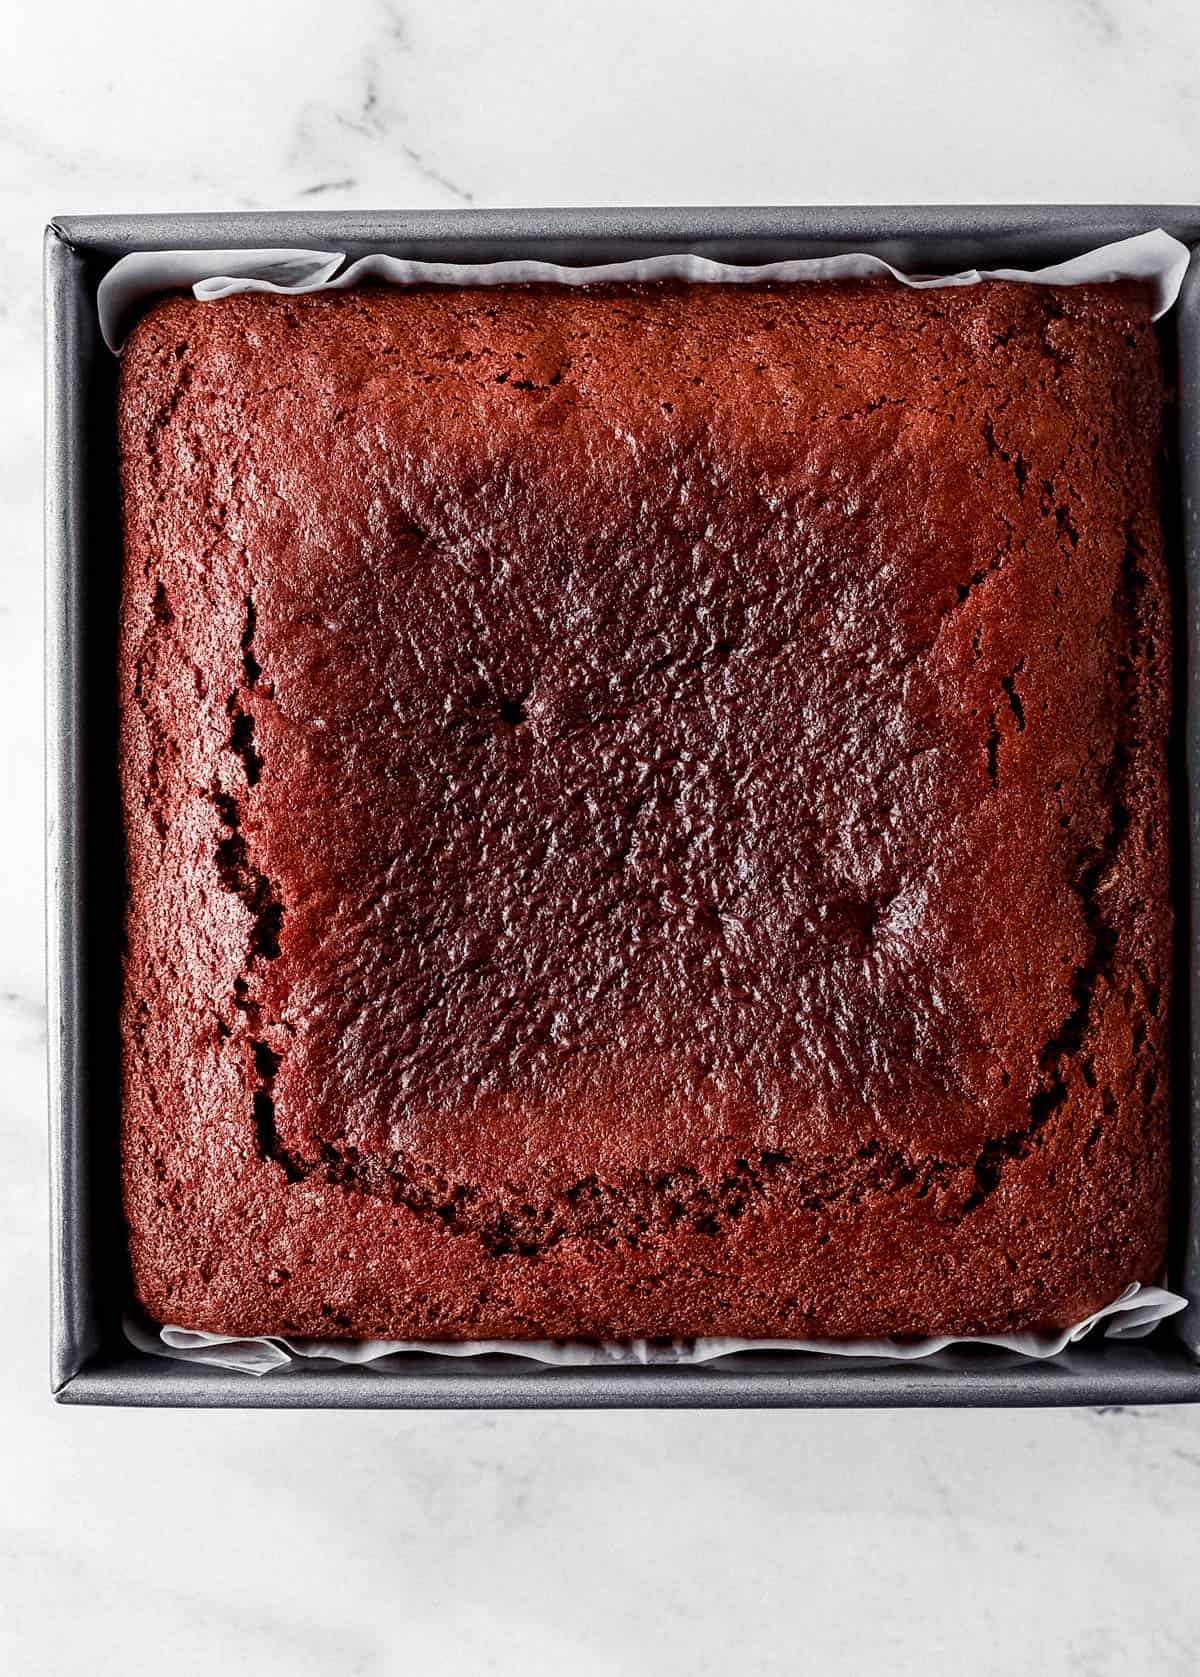 Overhead view of baked gingerbread cake in parchment lined baking pan on marble surface. 